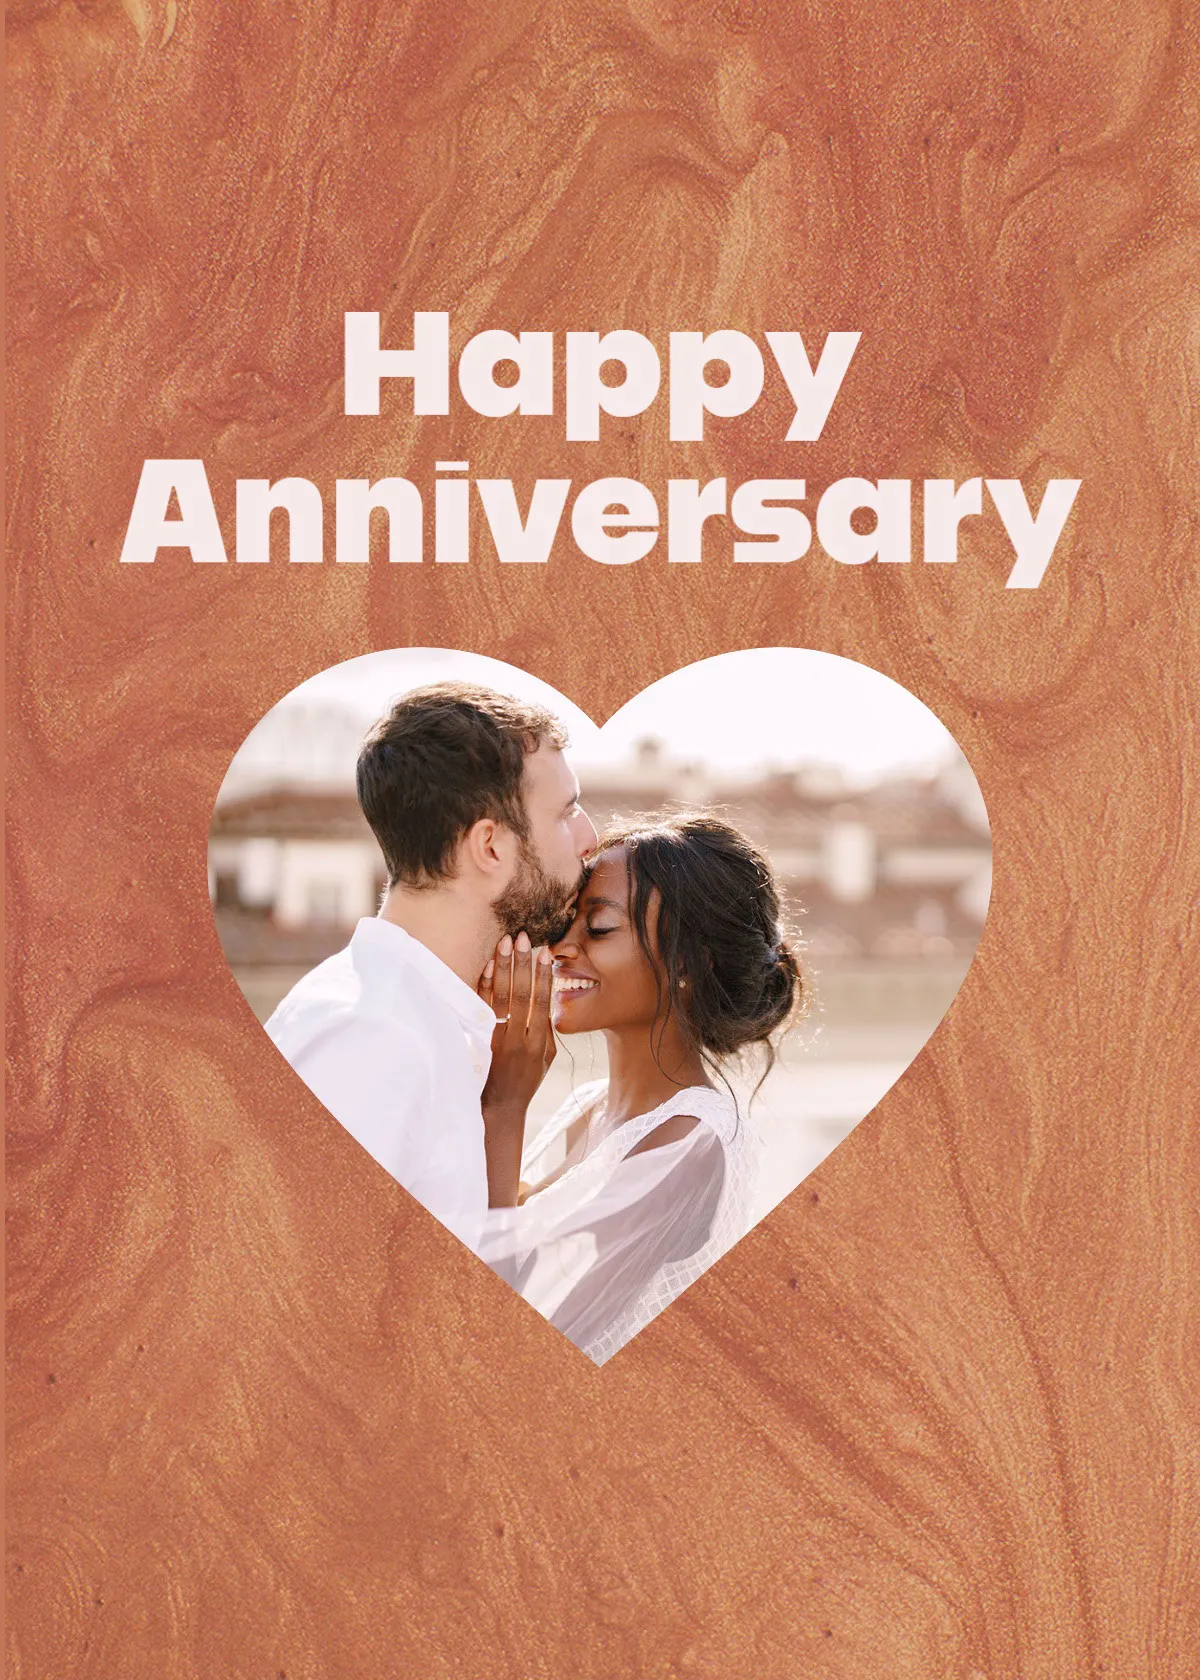 Brown And White Heart Picture Anniversary Card